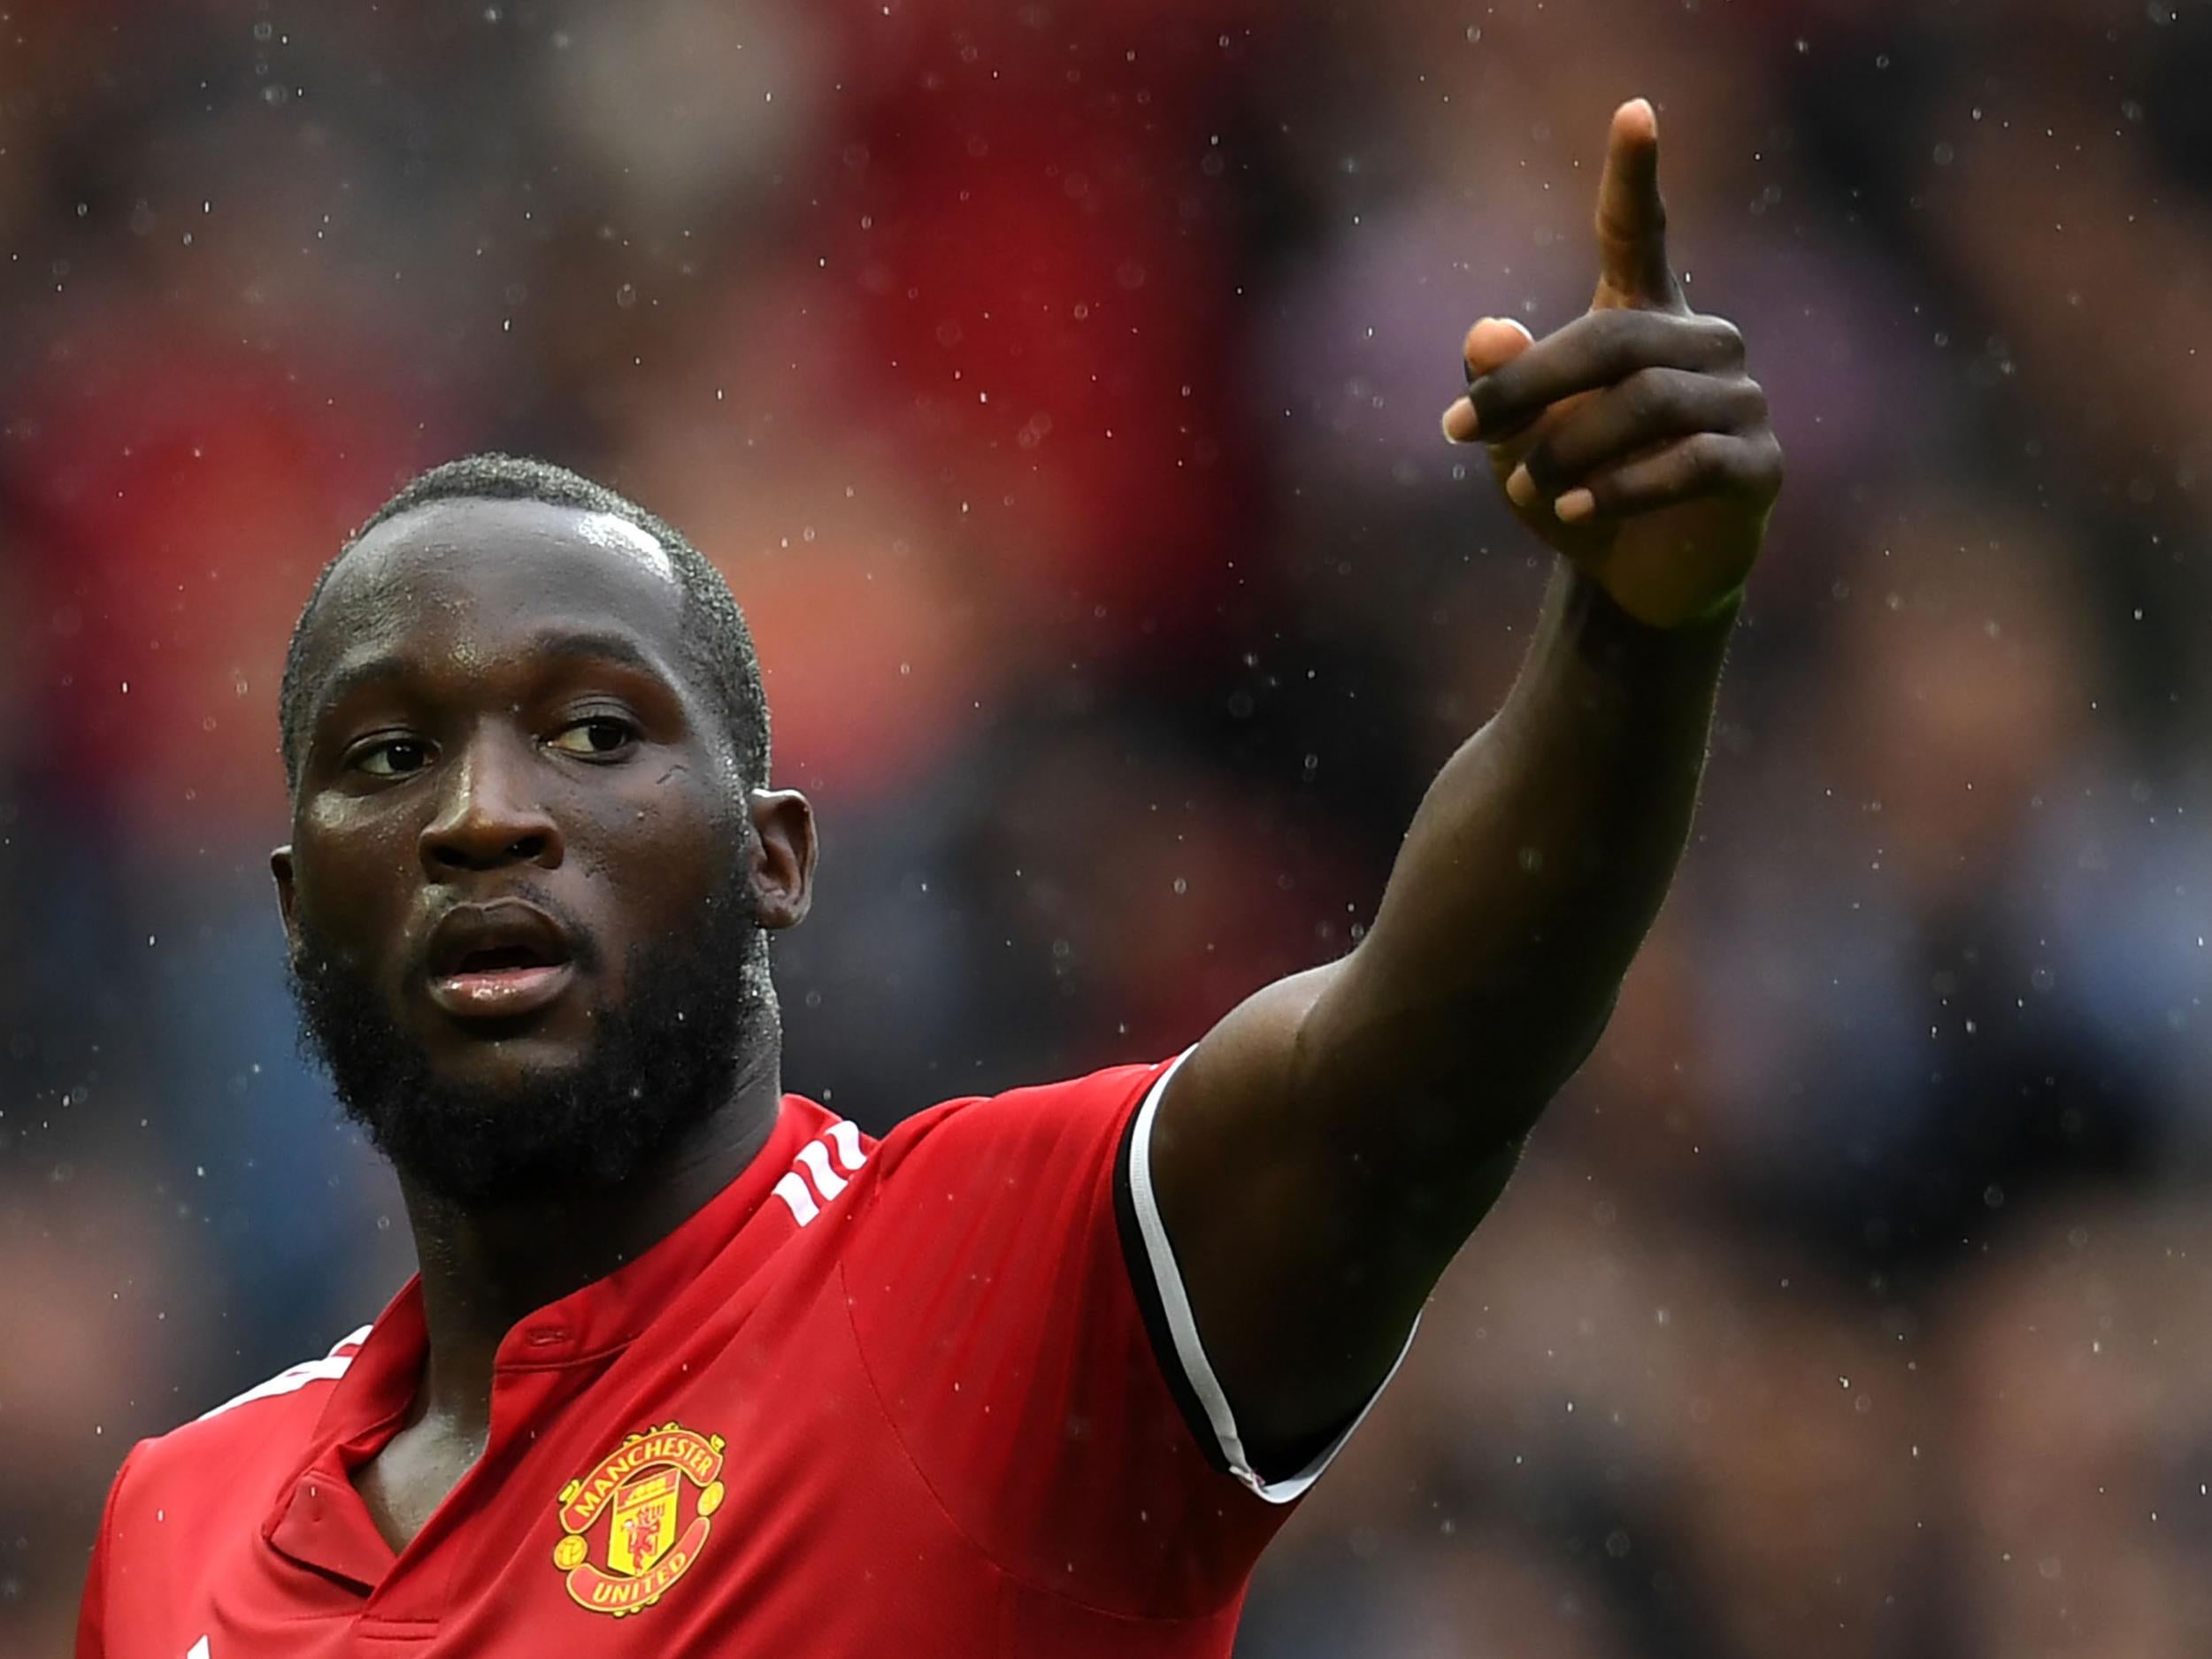 Romelu Lukaku pleads not guilty to excessive partying in LA prior to